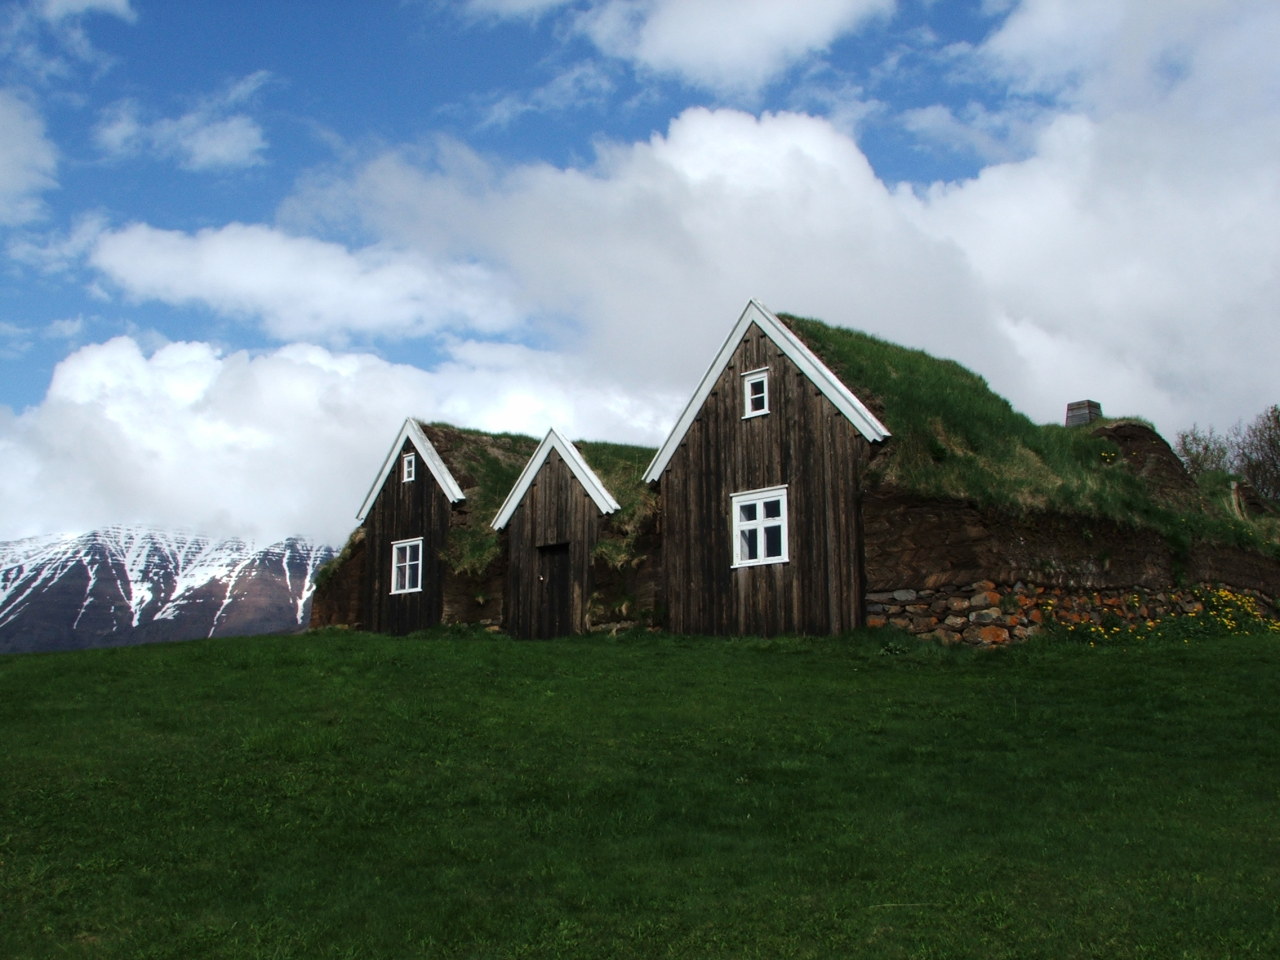 Cabins in Hólar, Iceland. Contributed by Shawna Nelson.